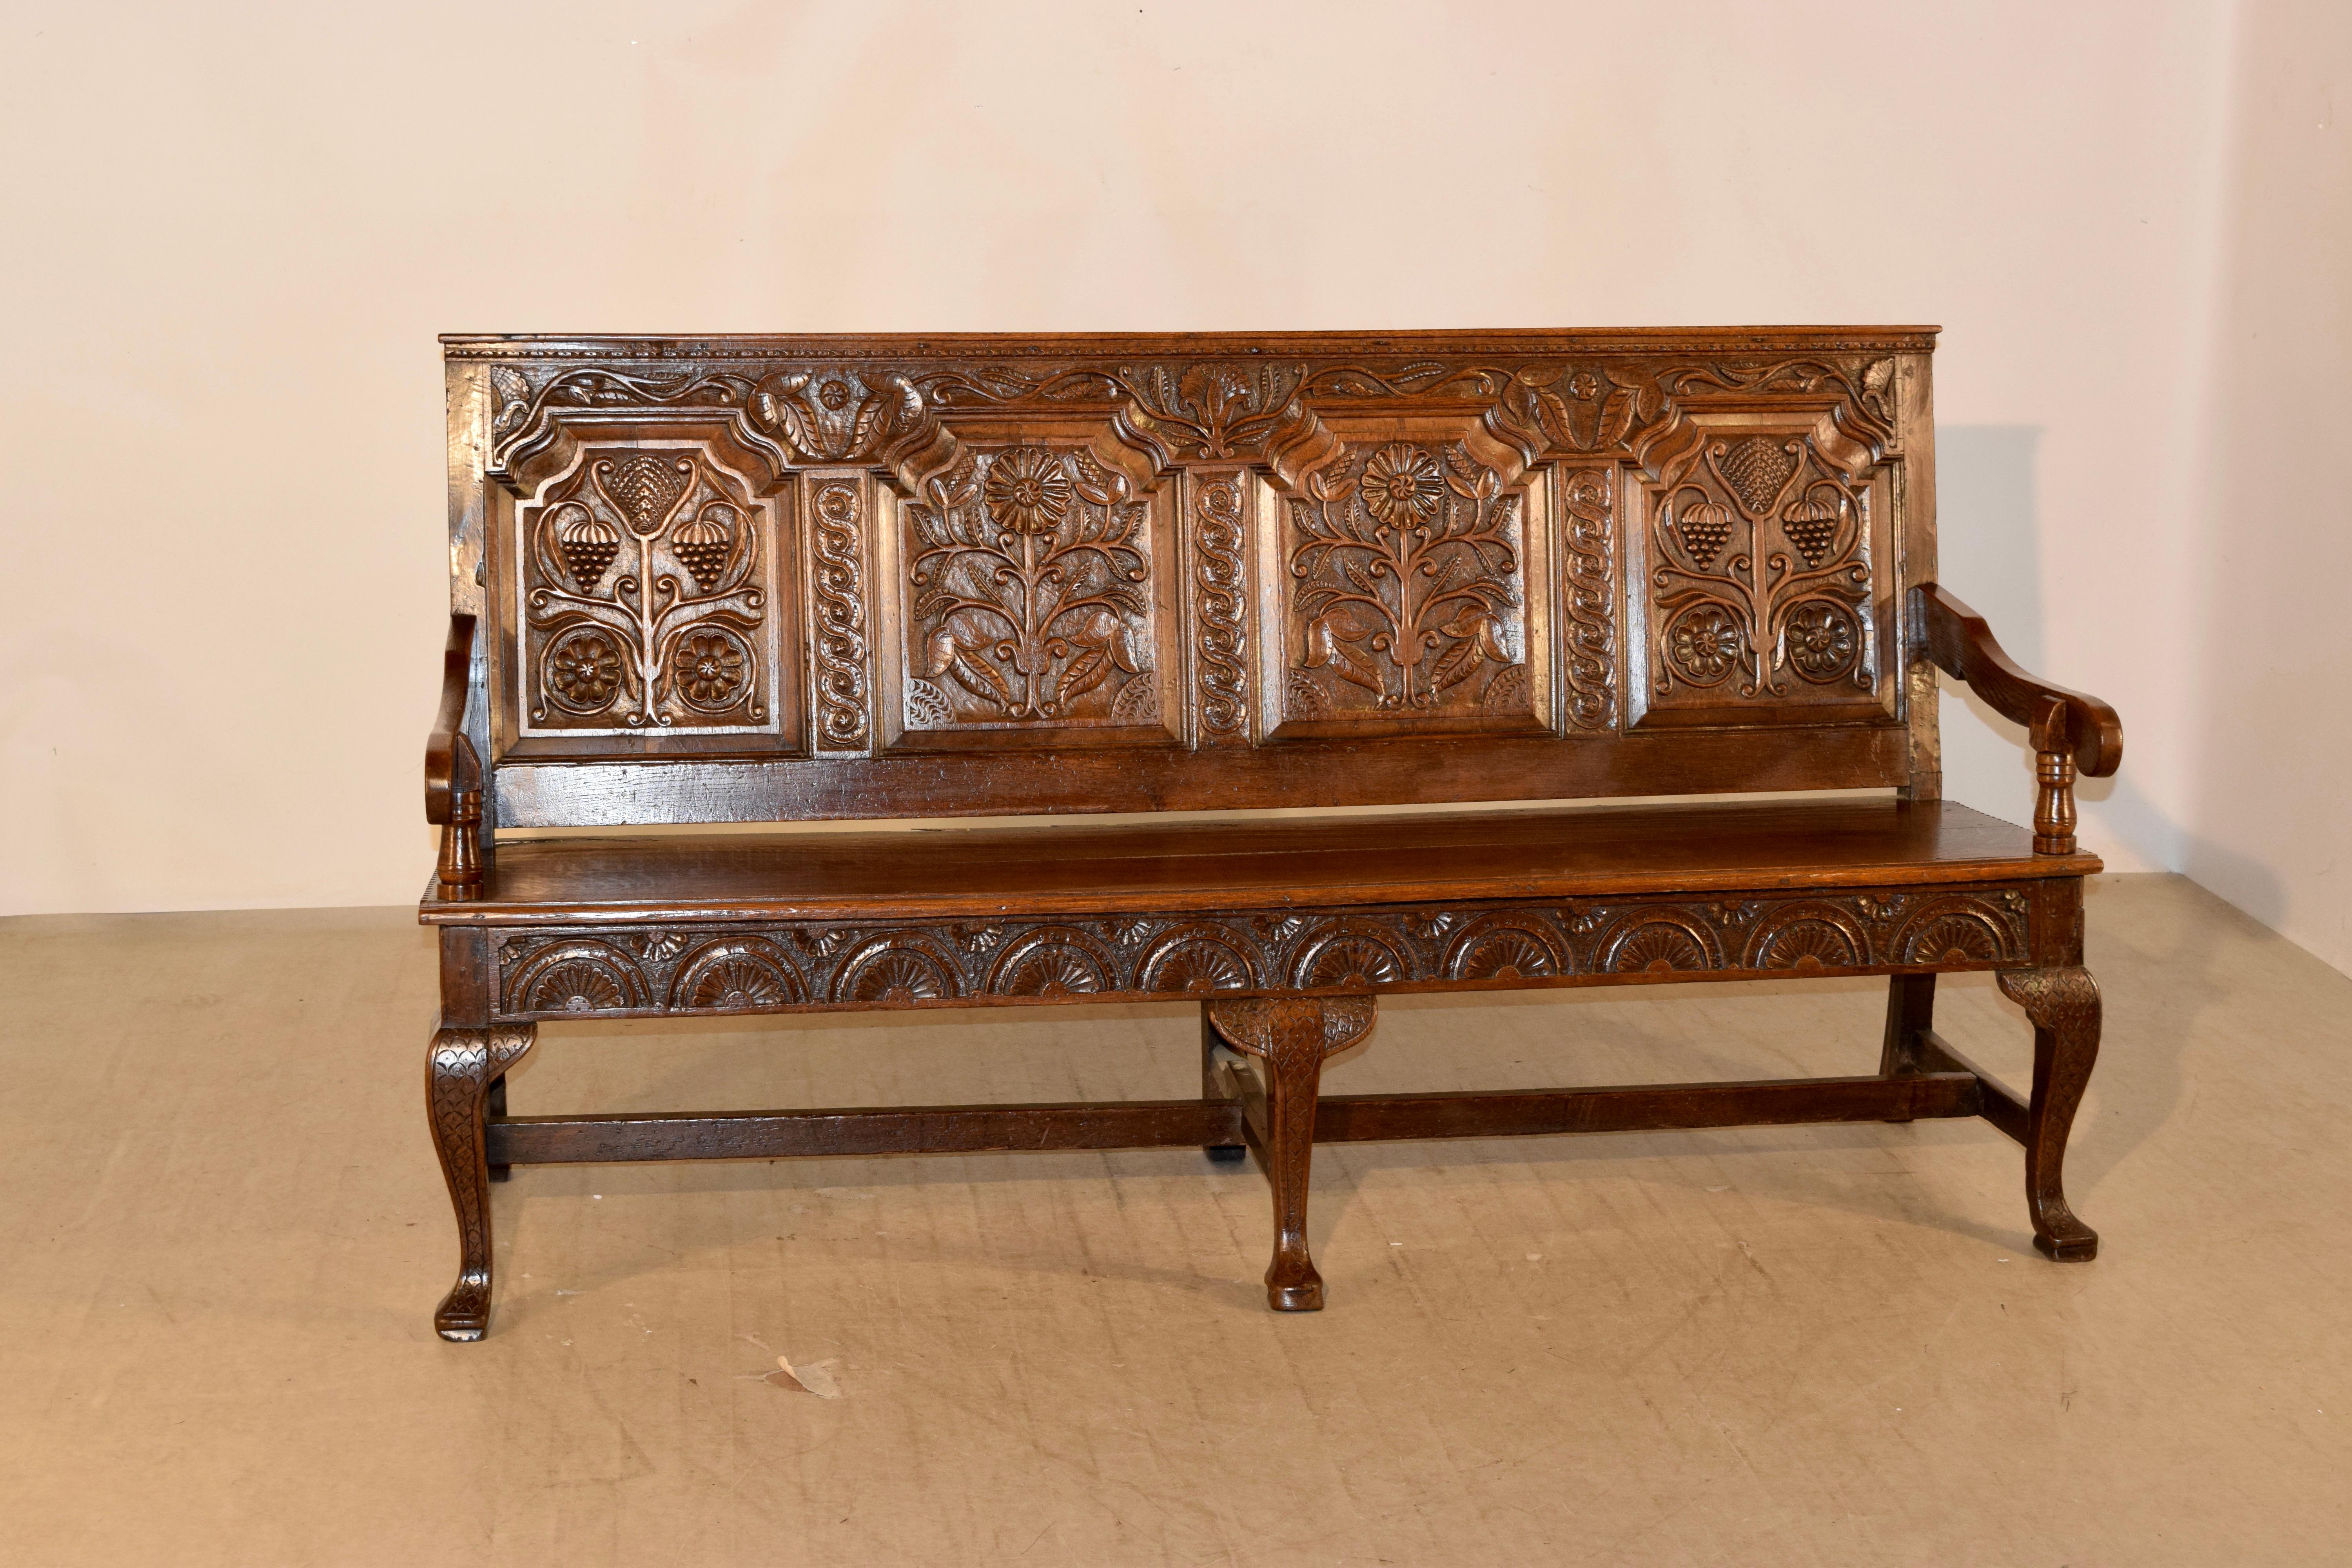 Early 18th Century Paneled Bench In Good Condition For Sale In High Point, NC